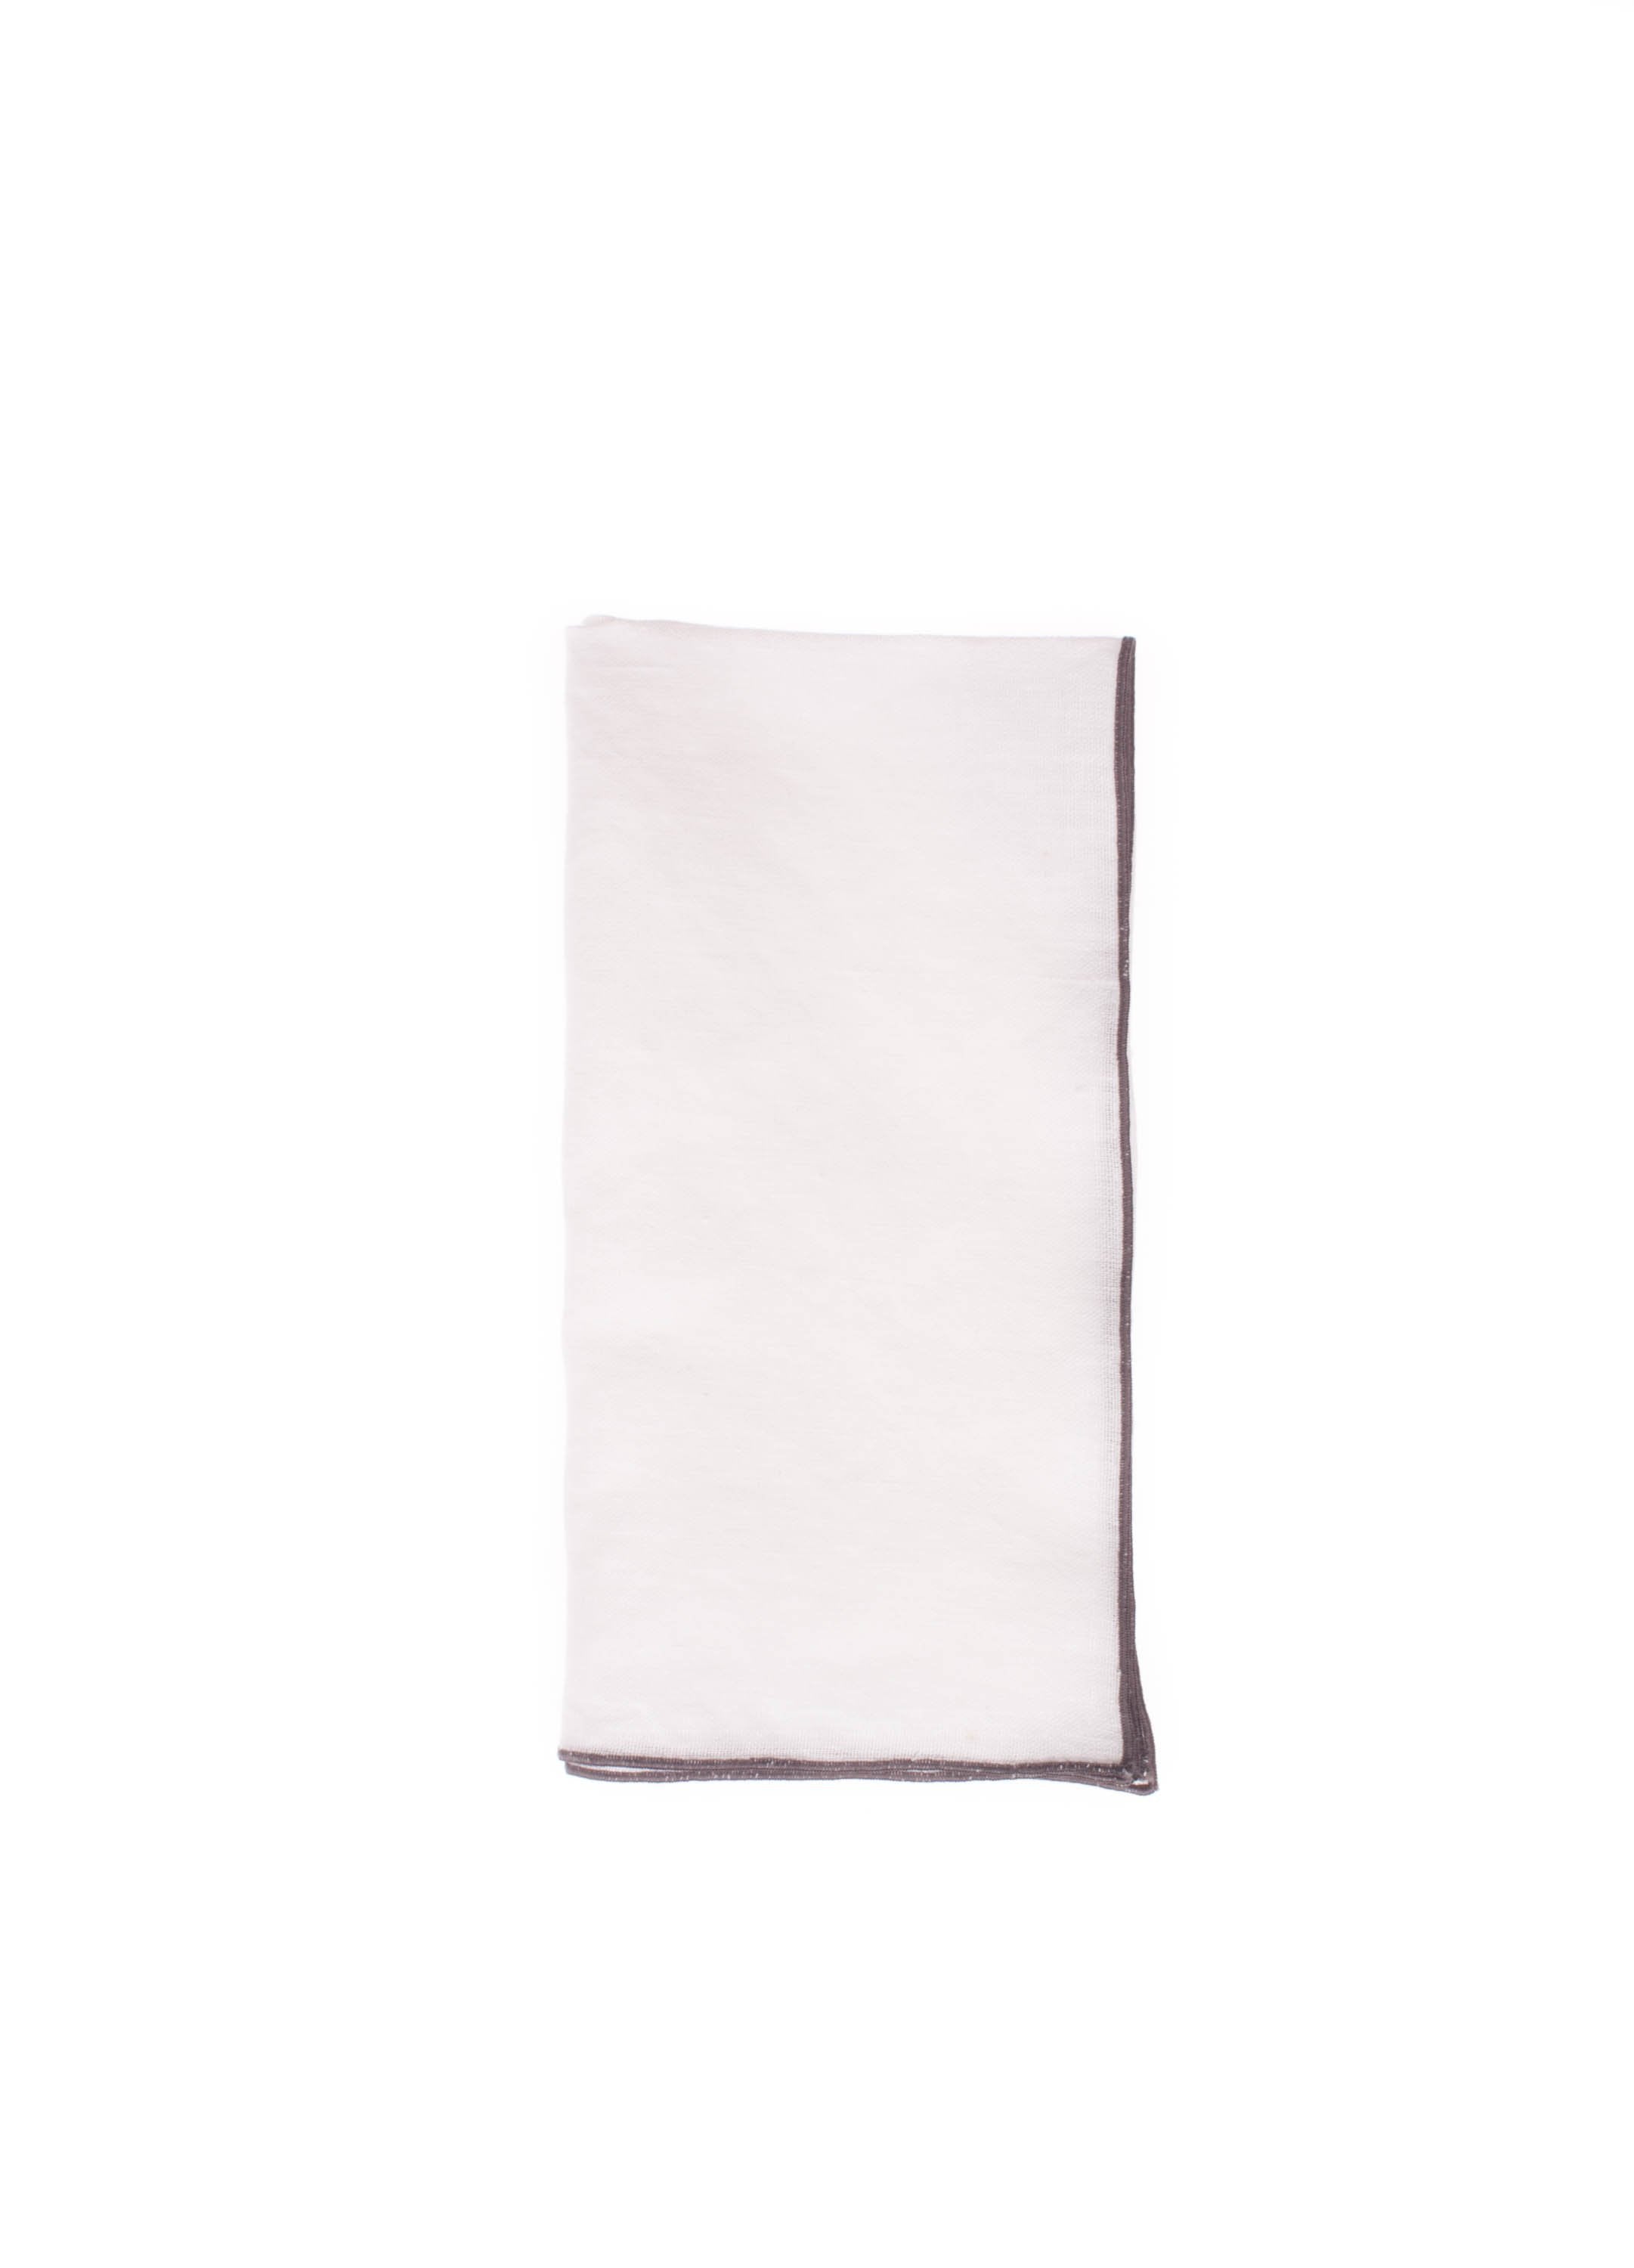 Babylock Linen Napkin in White with Charcoal